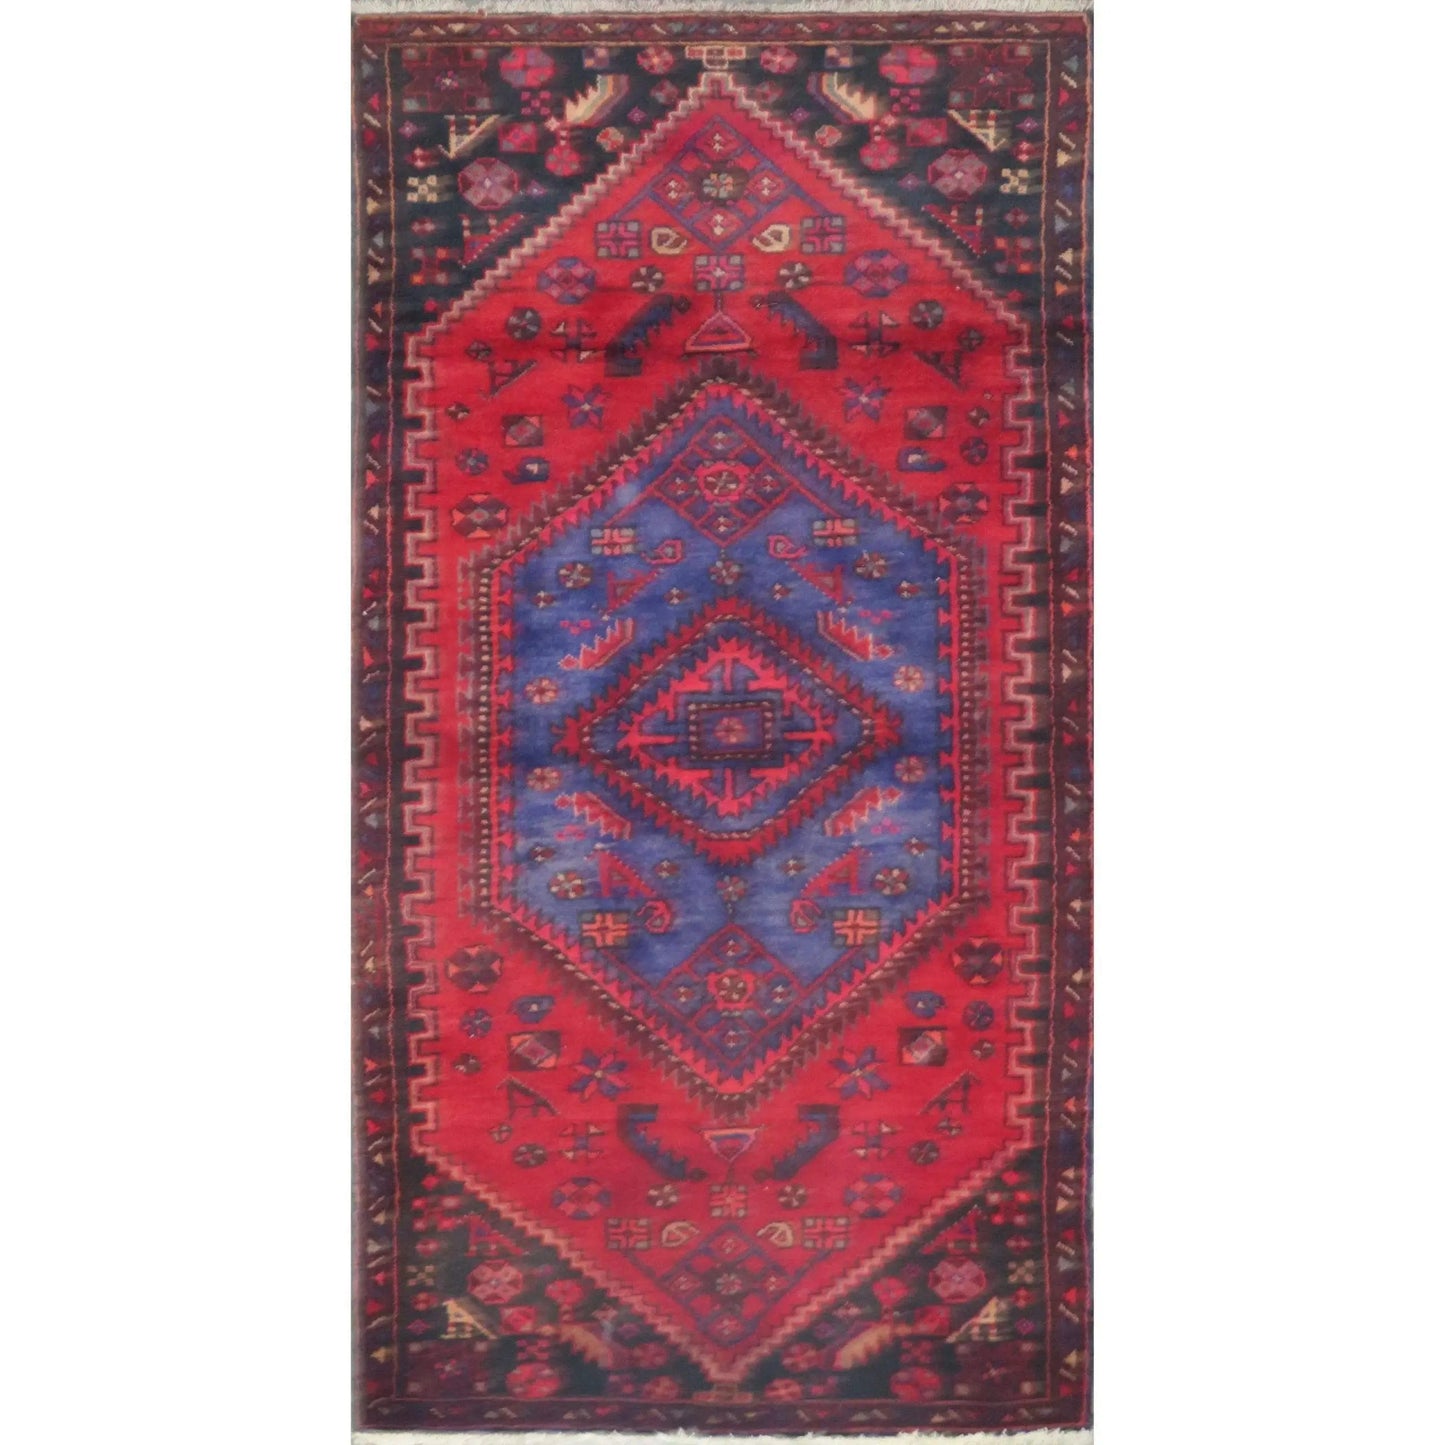 Hand-Knotted Persian Wool Rug _ Luxurious Vintage Design, 6'7" x 3'4", Artisan Crafted